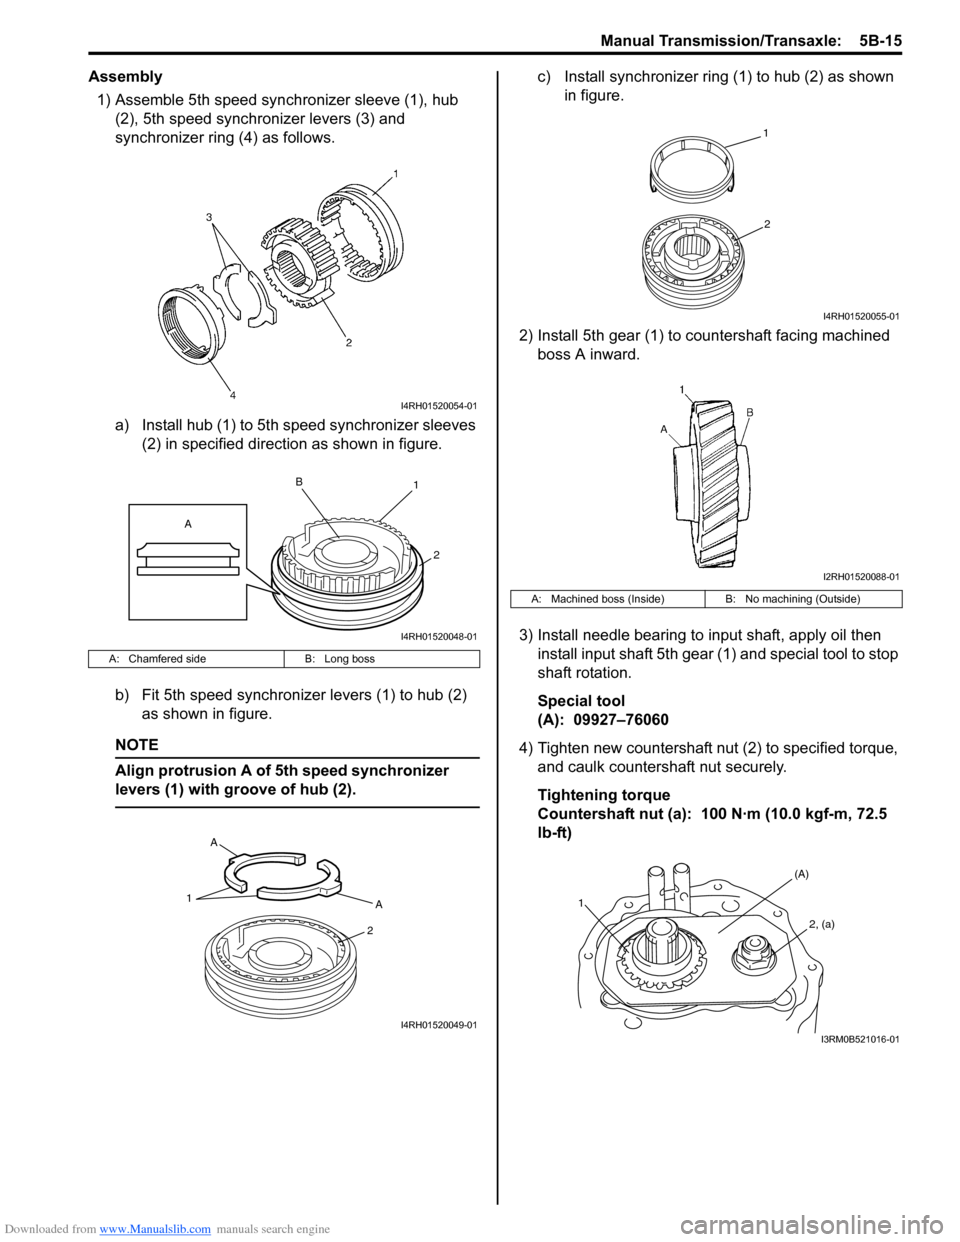 SUZUKI SWIFT 2006 2.G Service Workshop Manual Downloaded from www.Manualslib.com manuals search engine Manual Transmission/Transaxle:  5B-15
Assembly1) Assemble 5th speed synchronizer sleeve (1), hub  (2), 5th speed synchronizer levers (3) and 
s